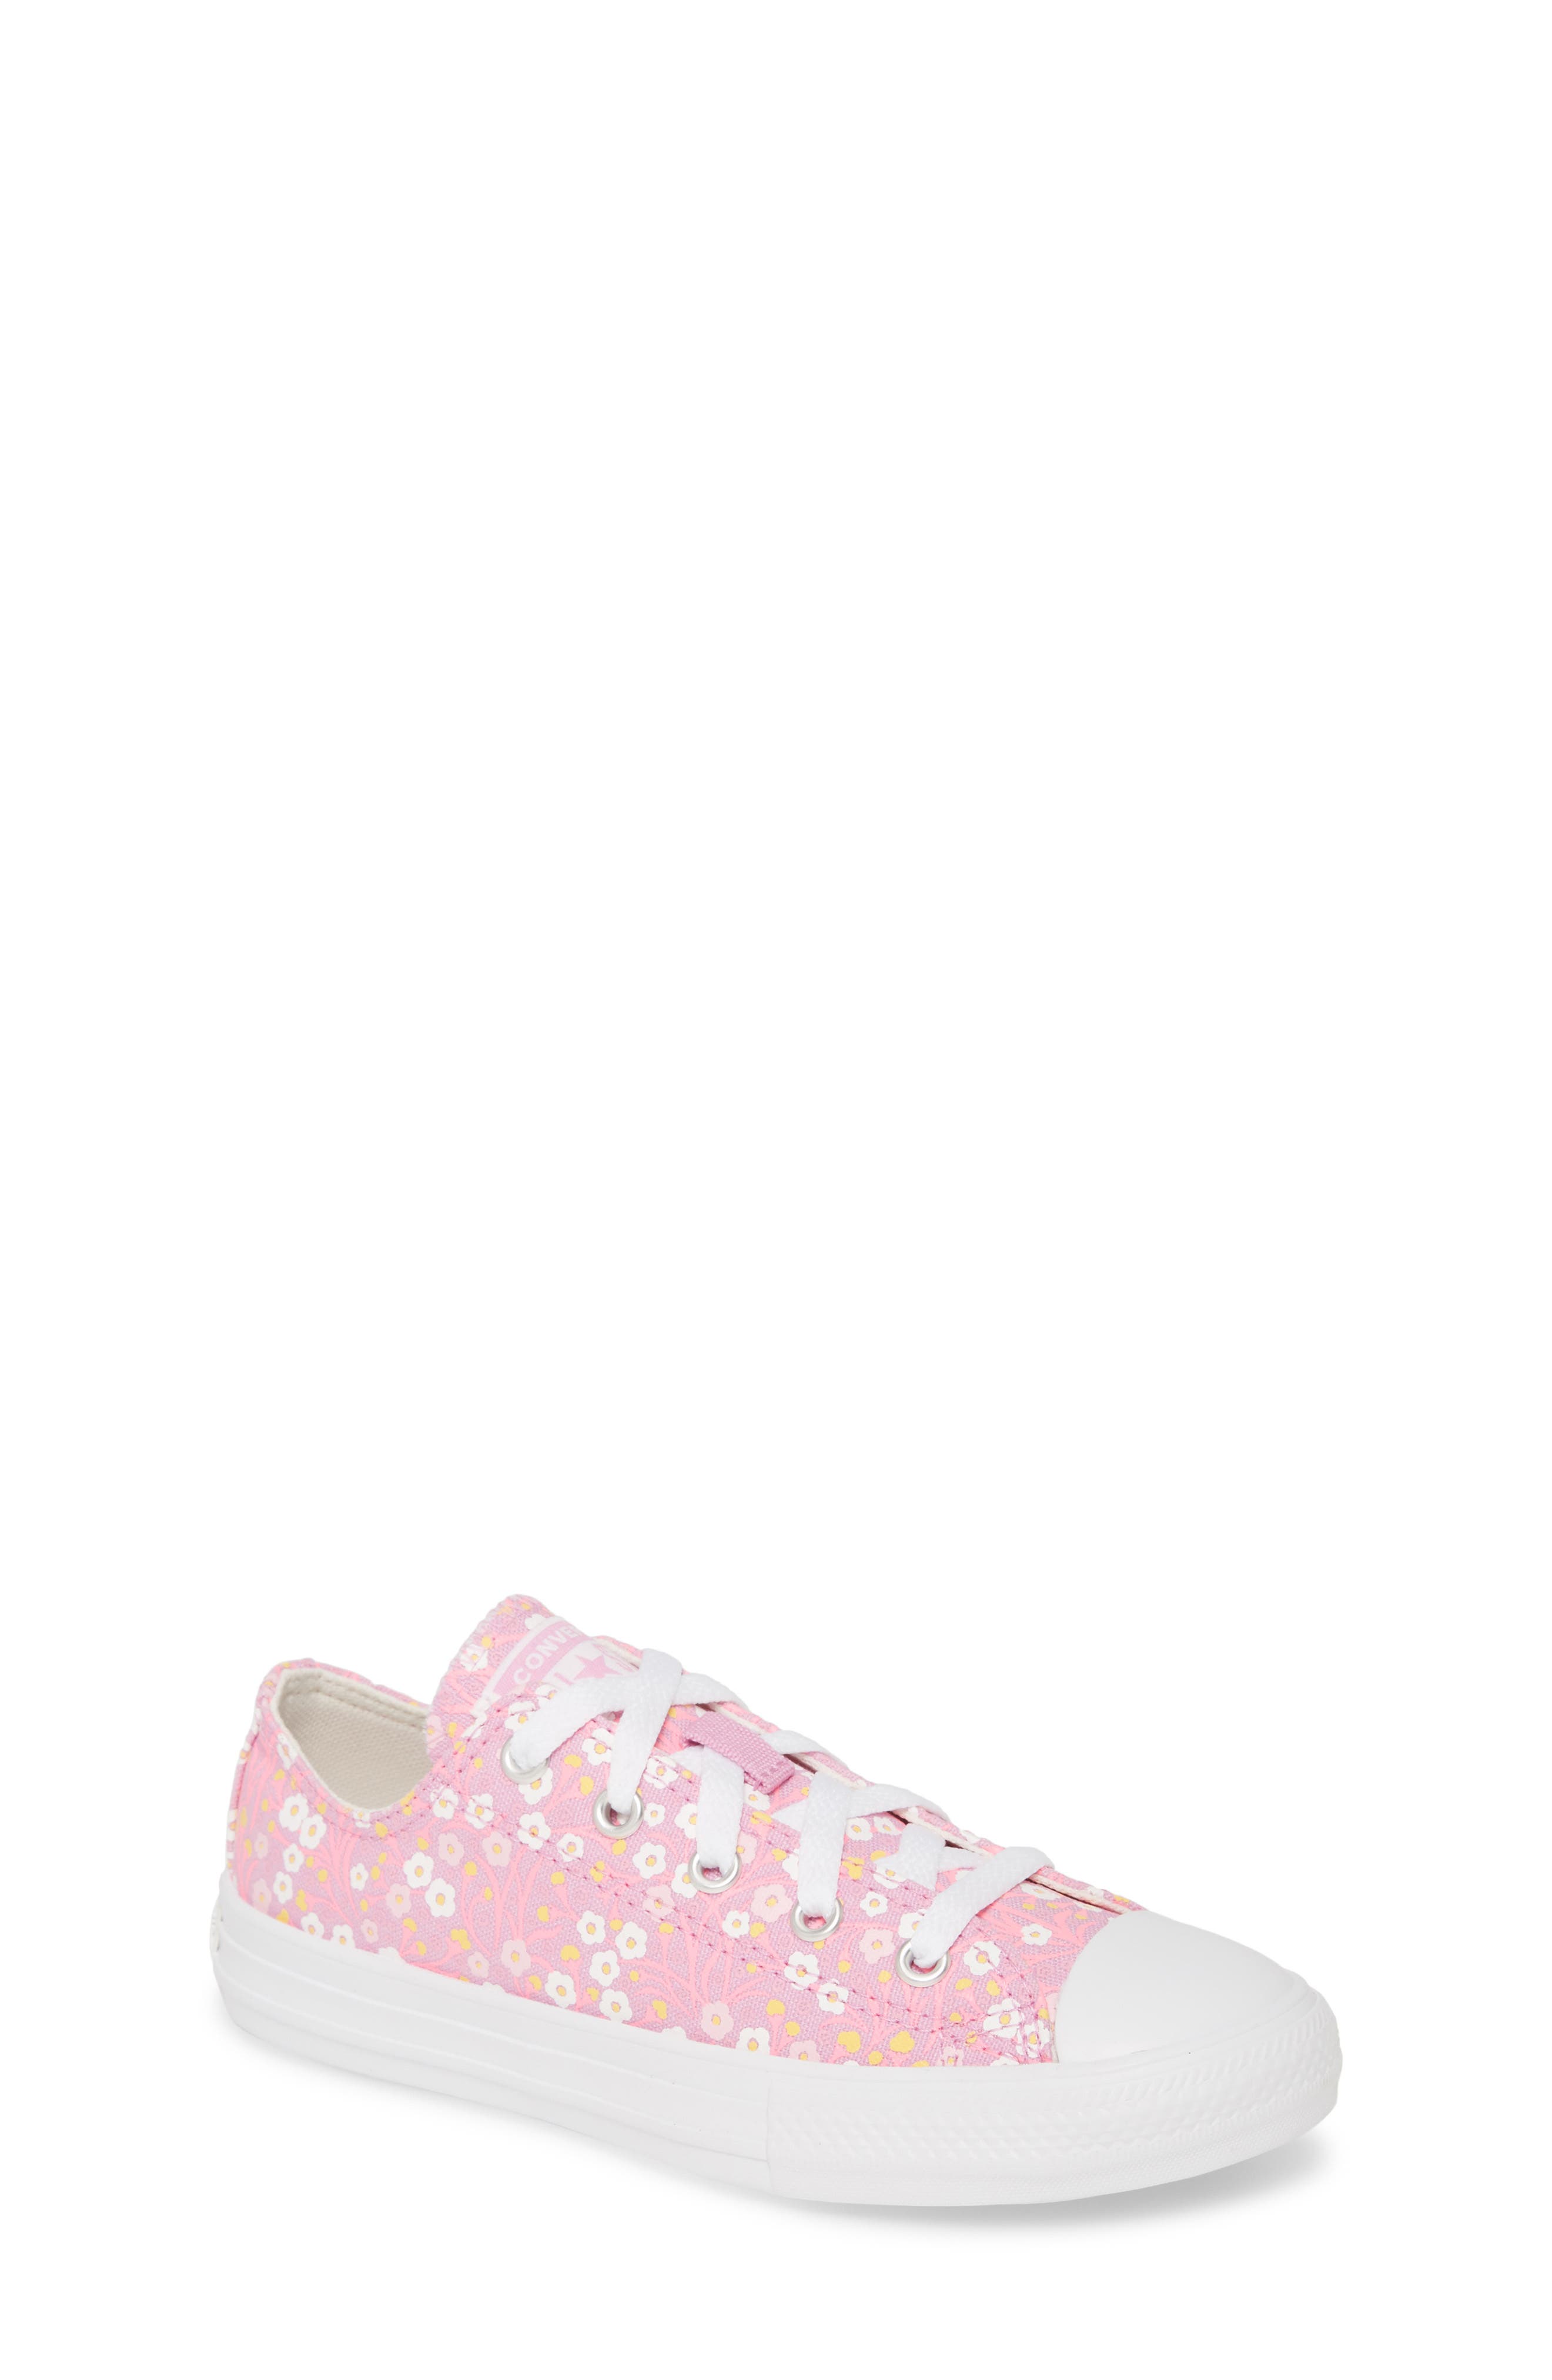 baby converse on sale